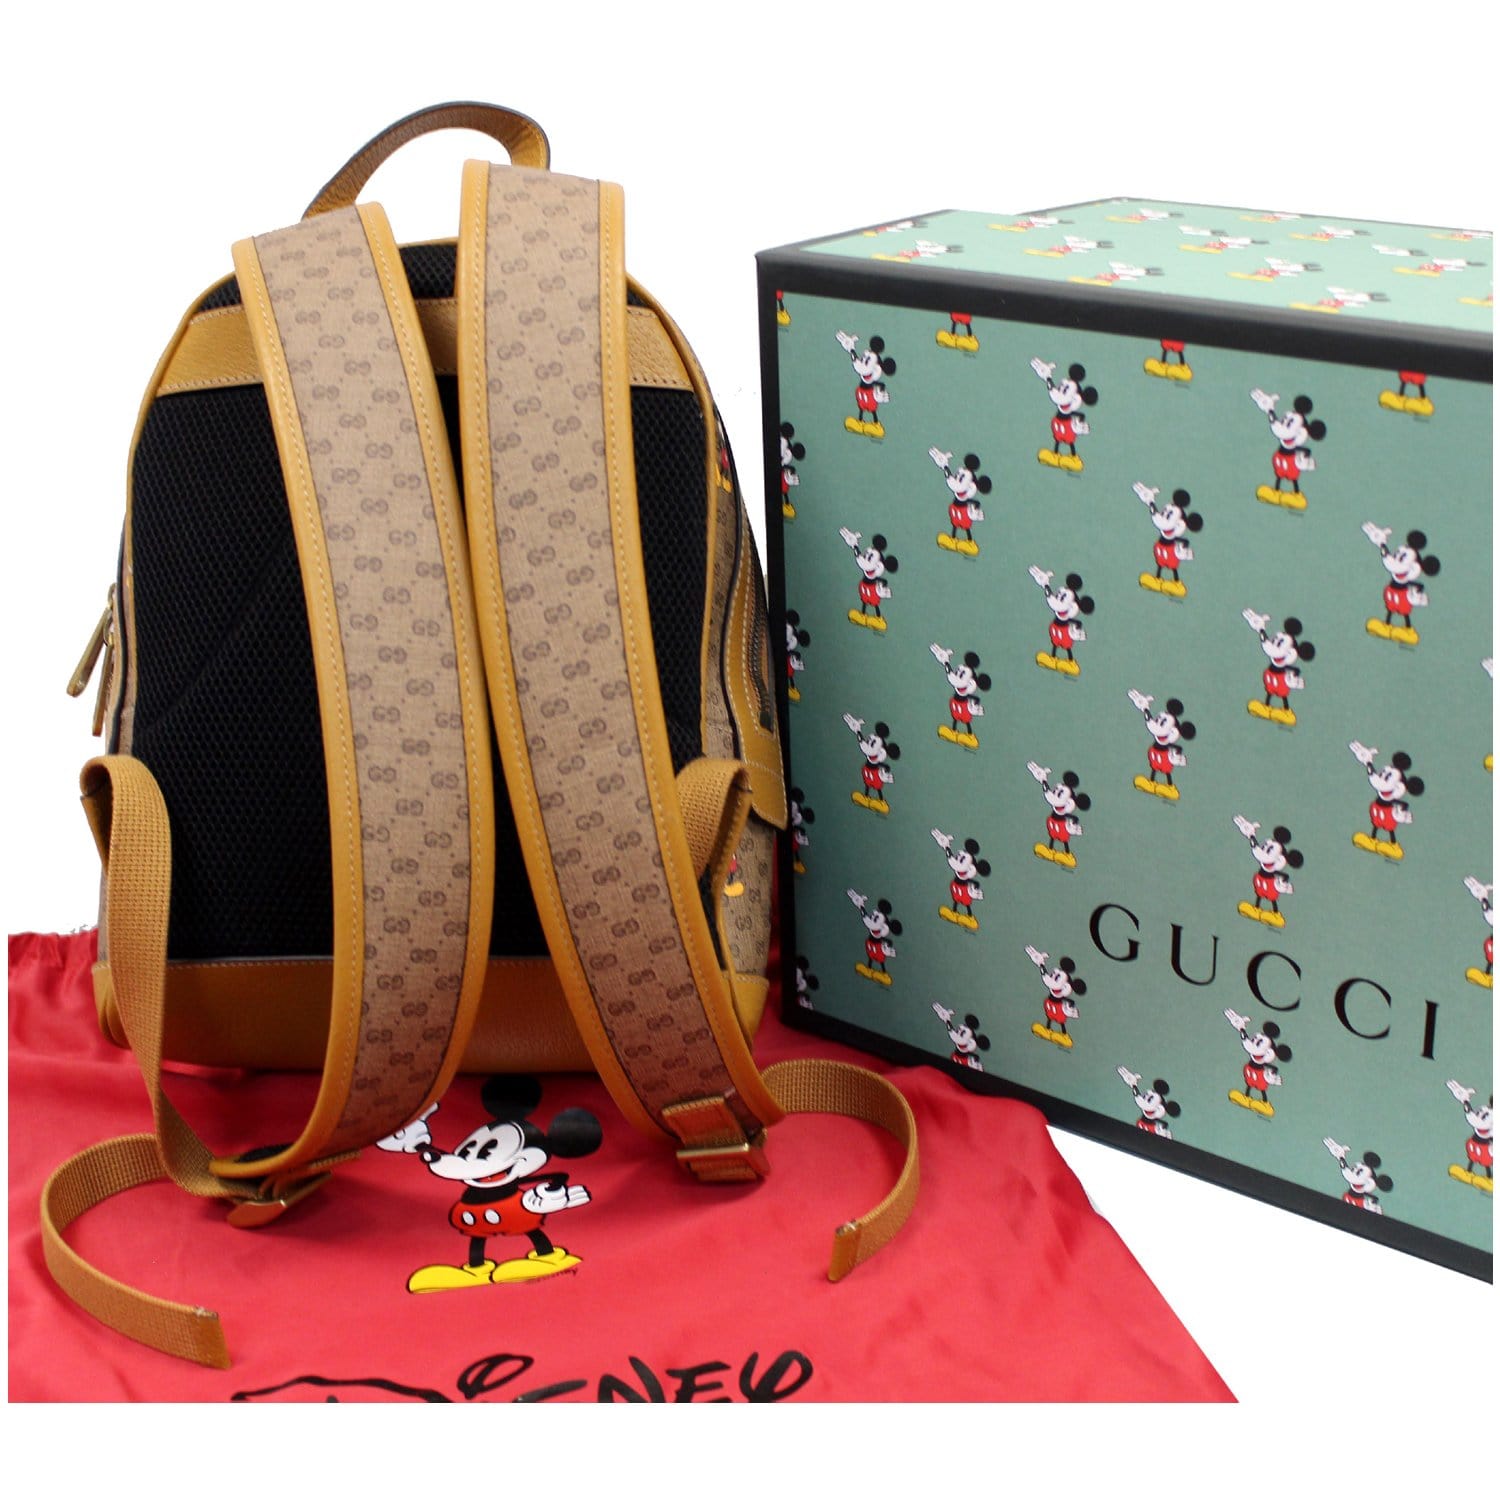 New Authentic Gucci x Disney Mickey Mouse GG Supreme Small Backpack Bag!!